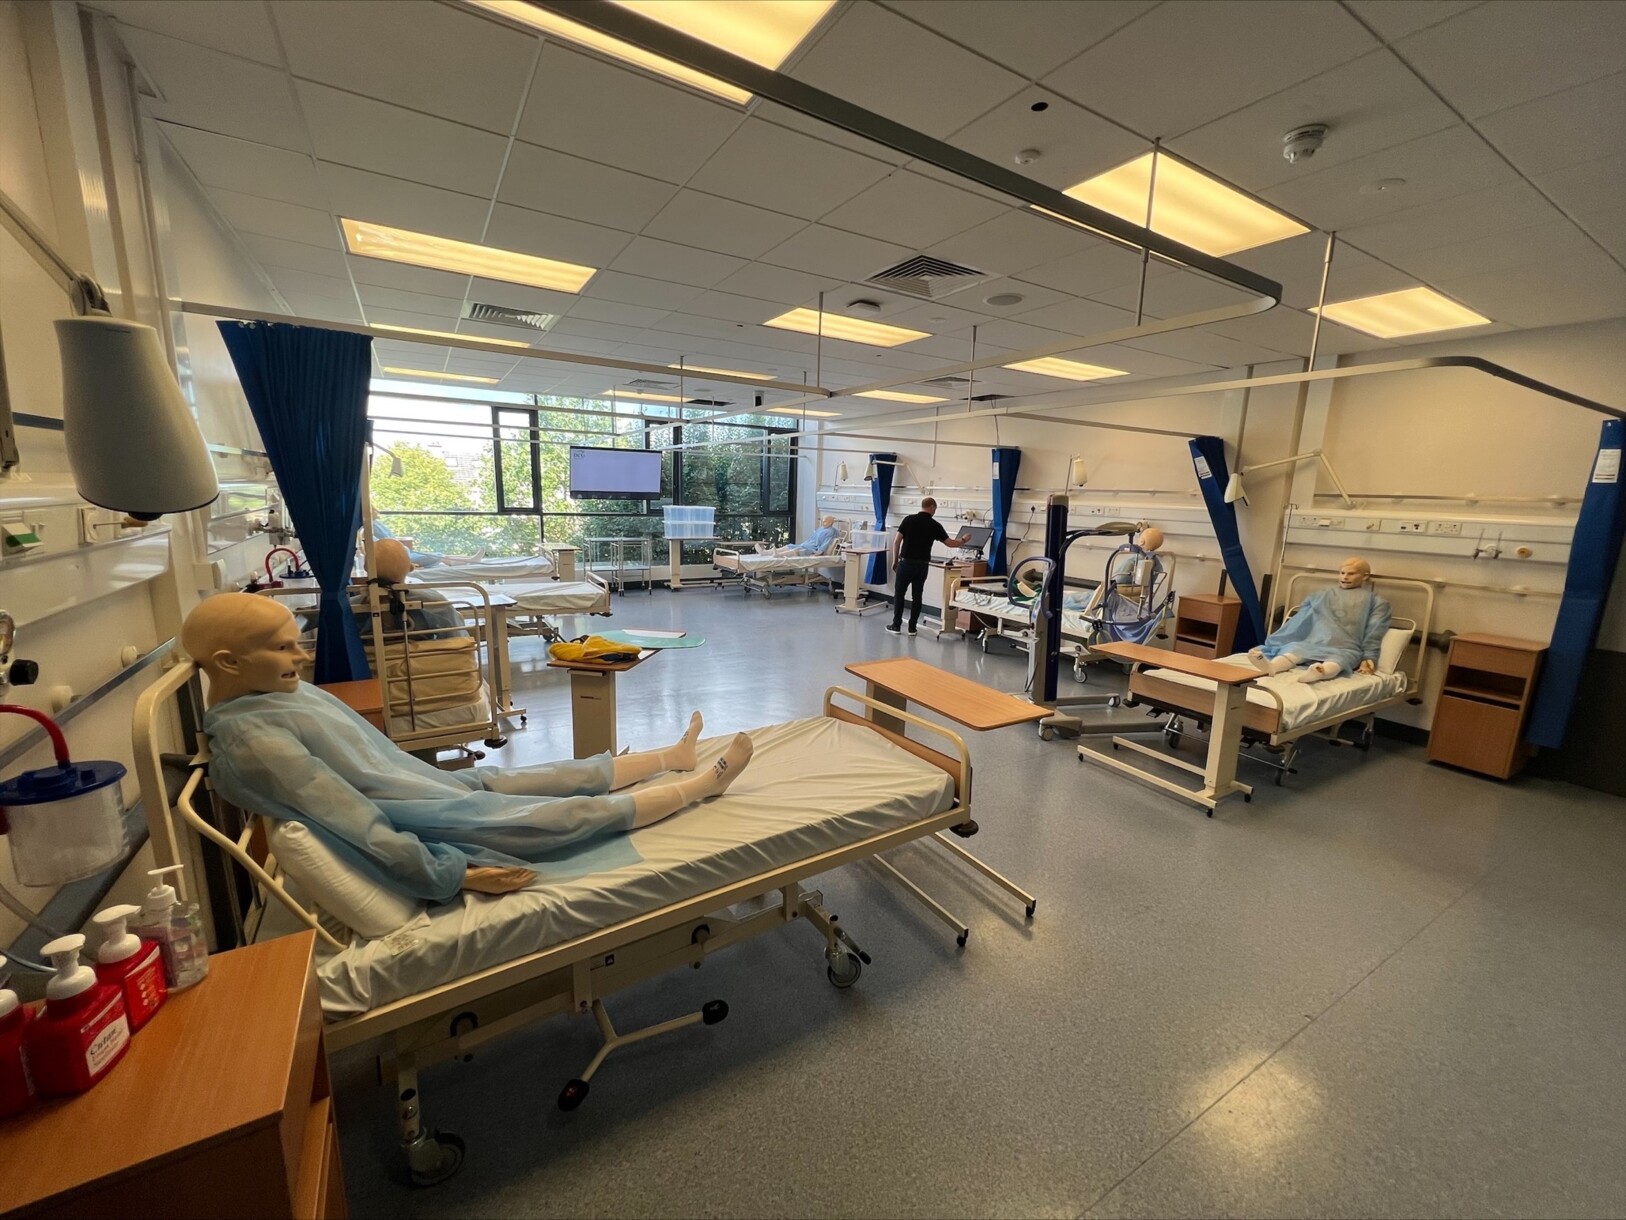 Main teaching area in the Clinical Skills lab at DCU.